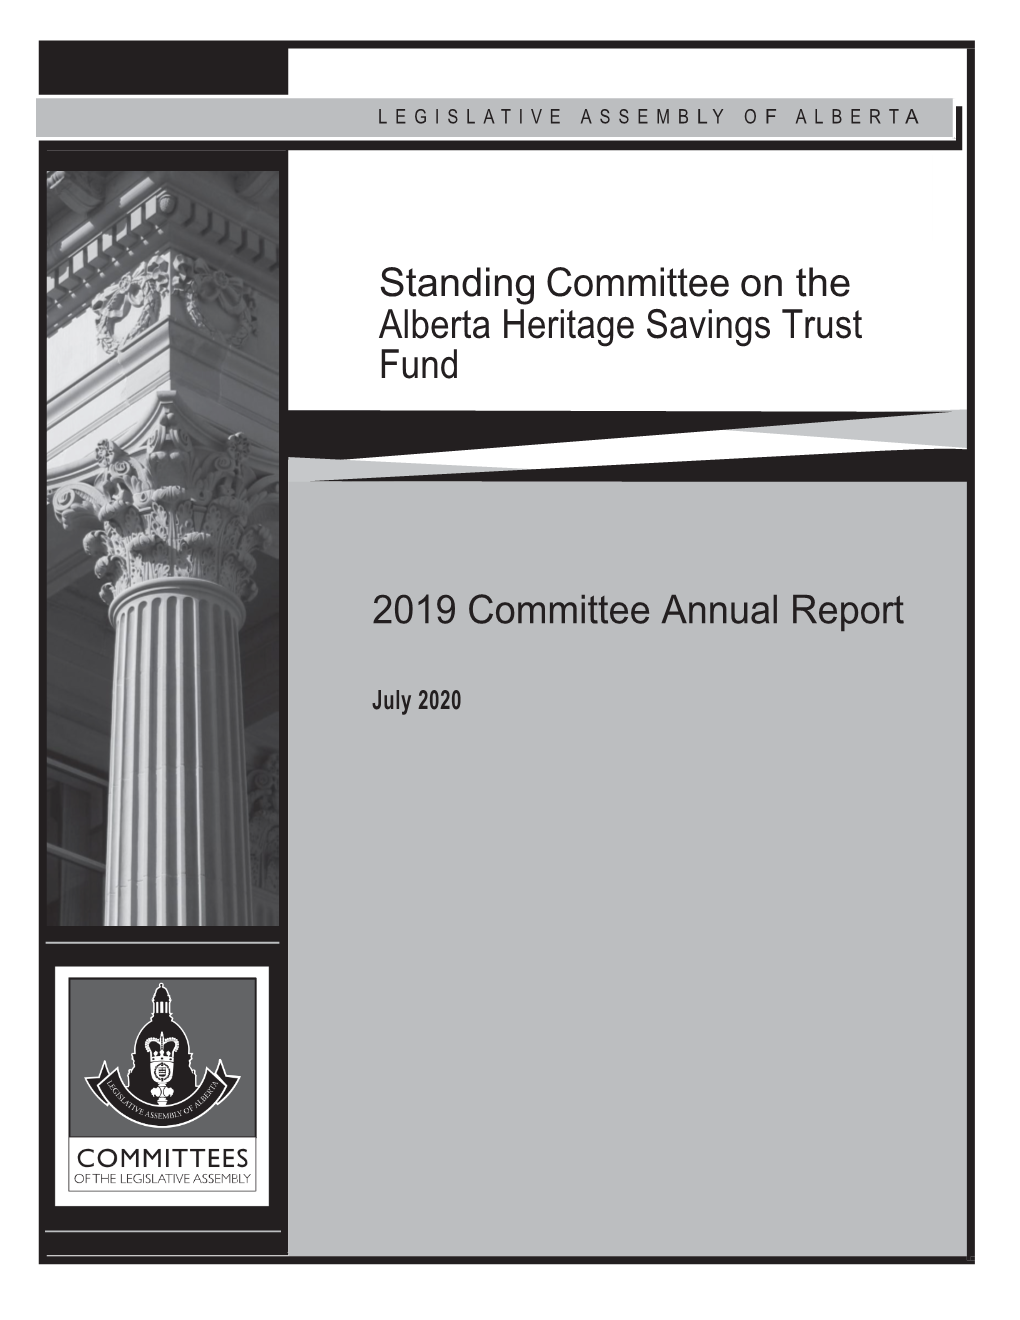 2019 Annual Report of the Standing